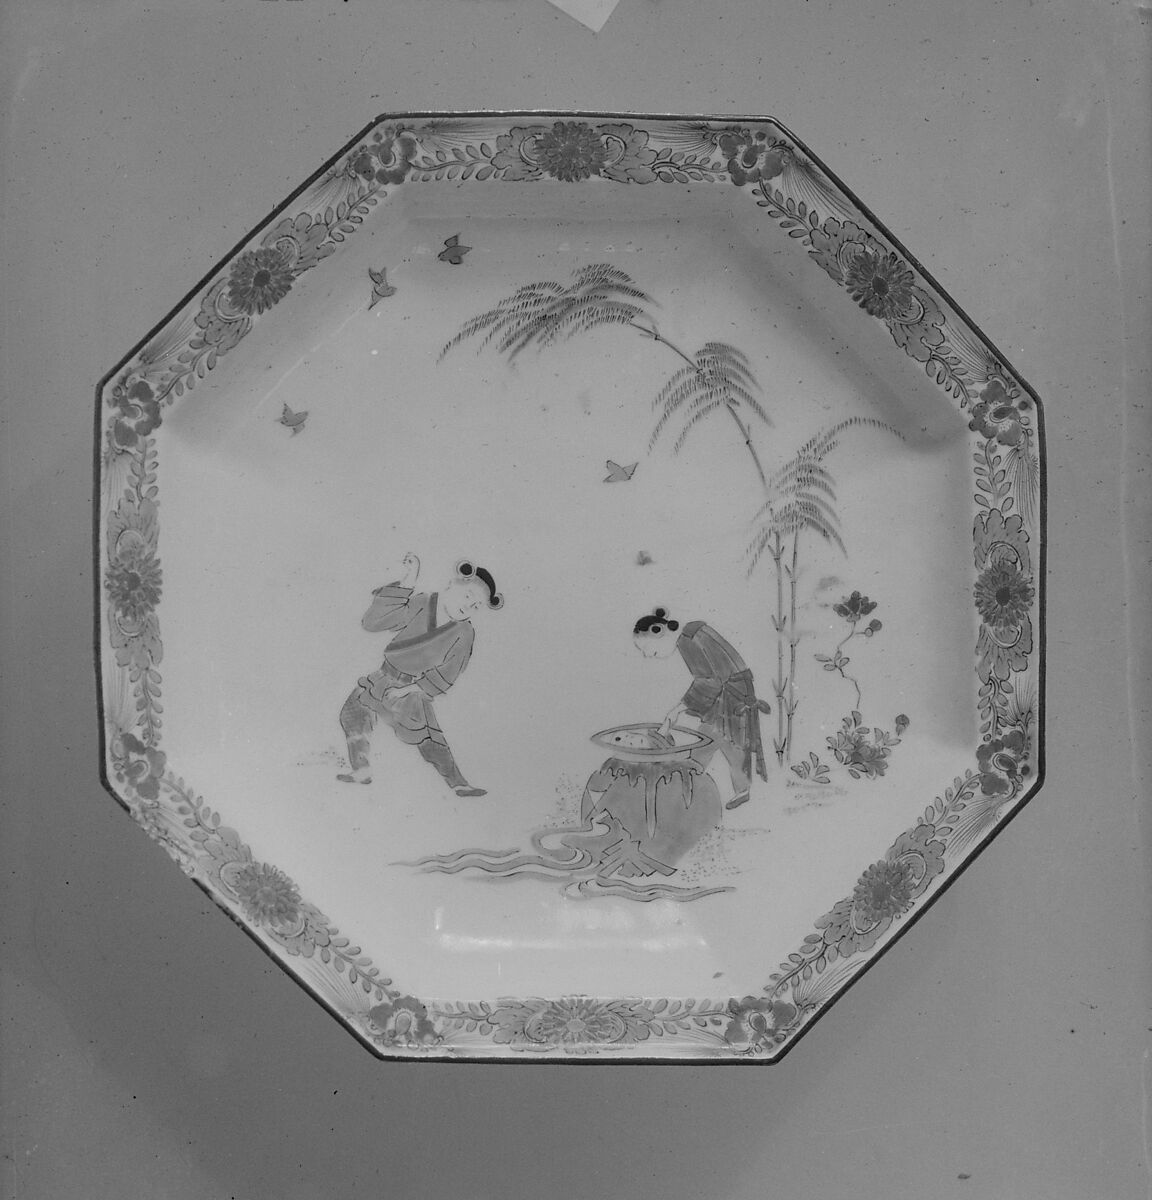 Octagonal Dish with the Story of Si Maguang ("Hob in the Well"), Porcelain painted with polychrome enamels and gold over transparent glaze (Hizen ware; Kakiemon type), Japan 